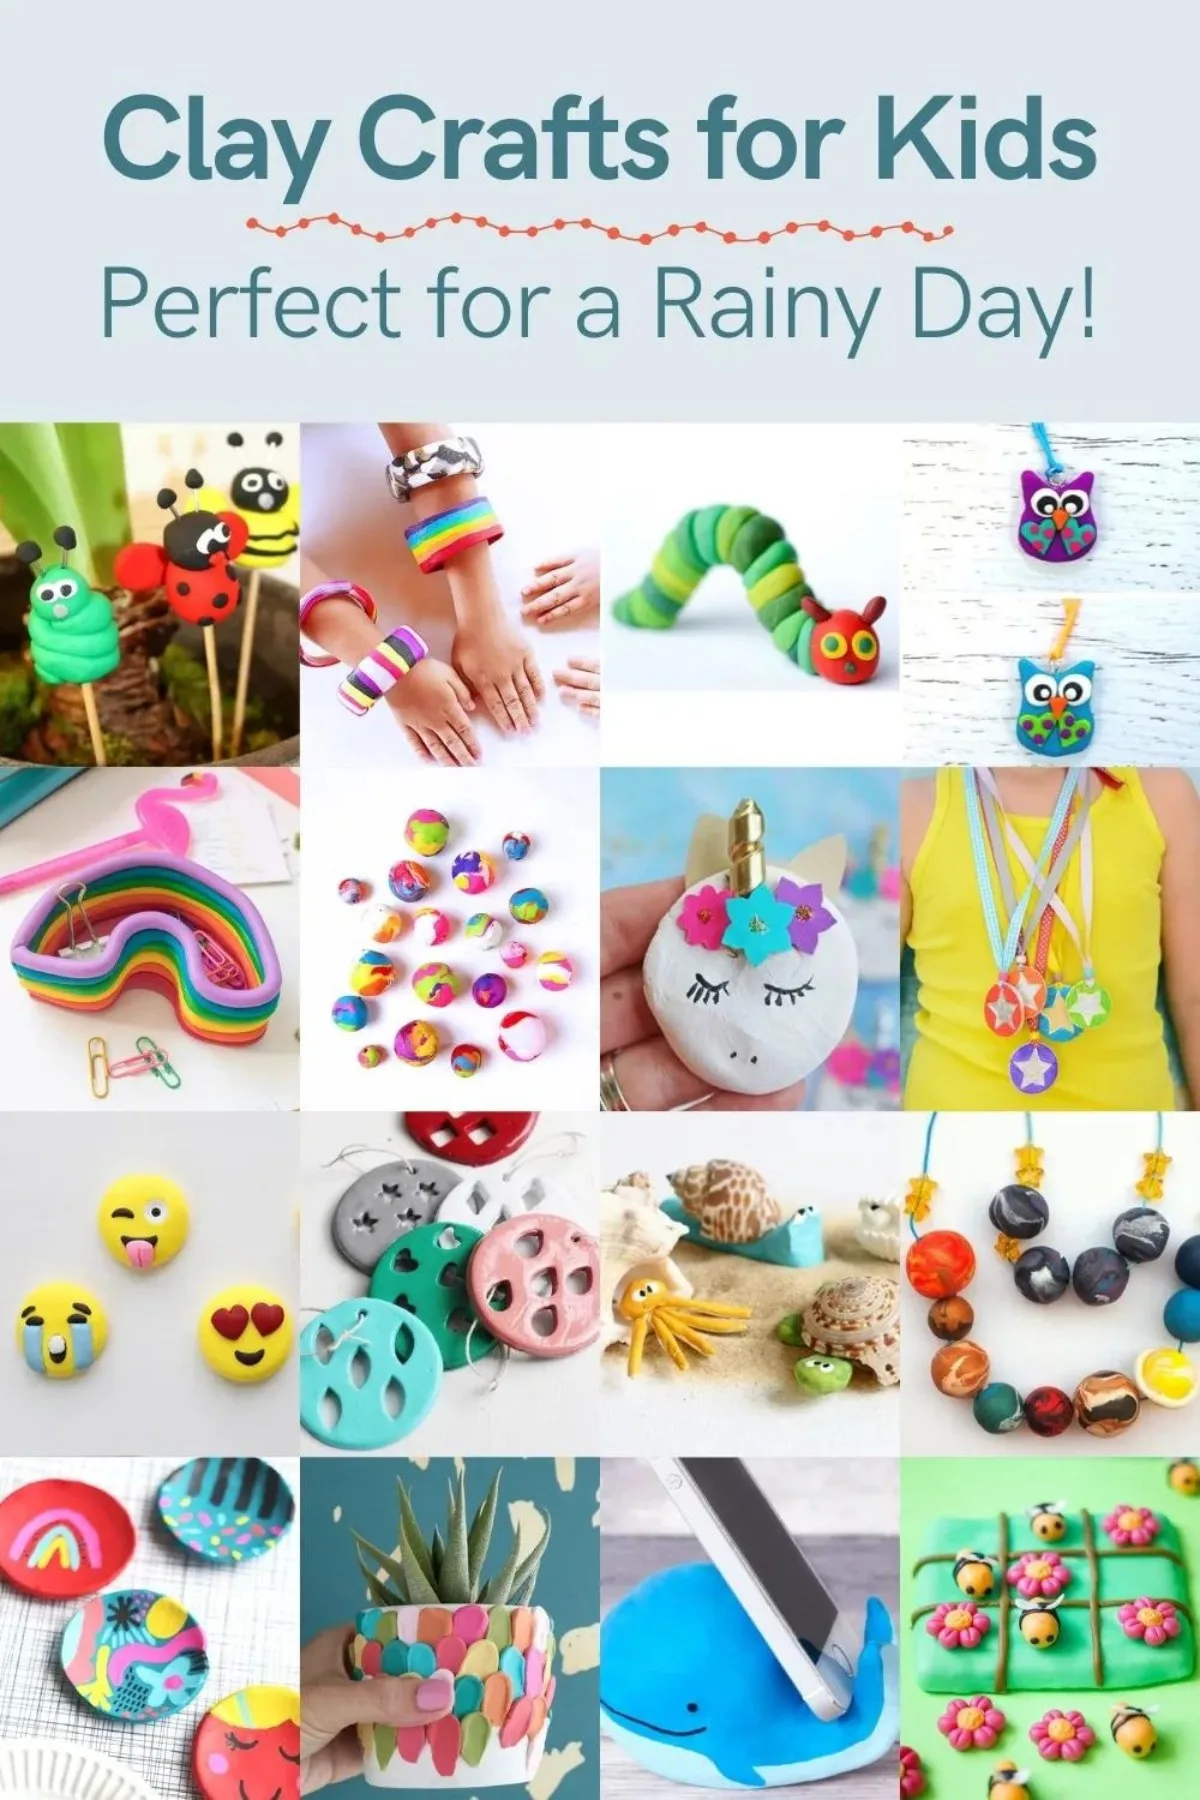 Air Dry Clay Projects for Kids  Clay projects for kids, Air dry clay  projects, Clay projects